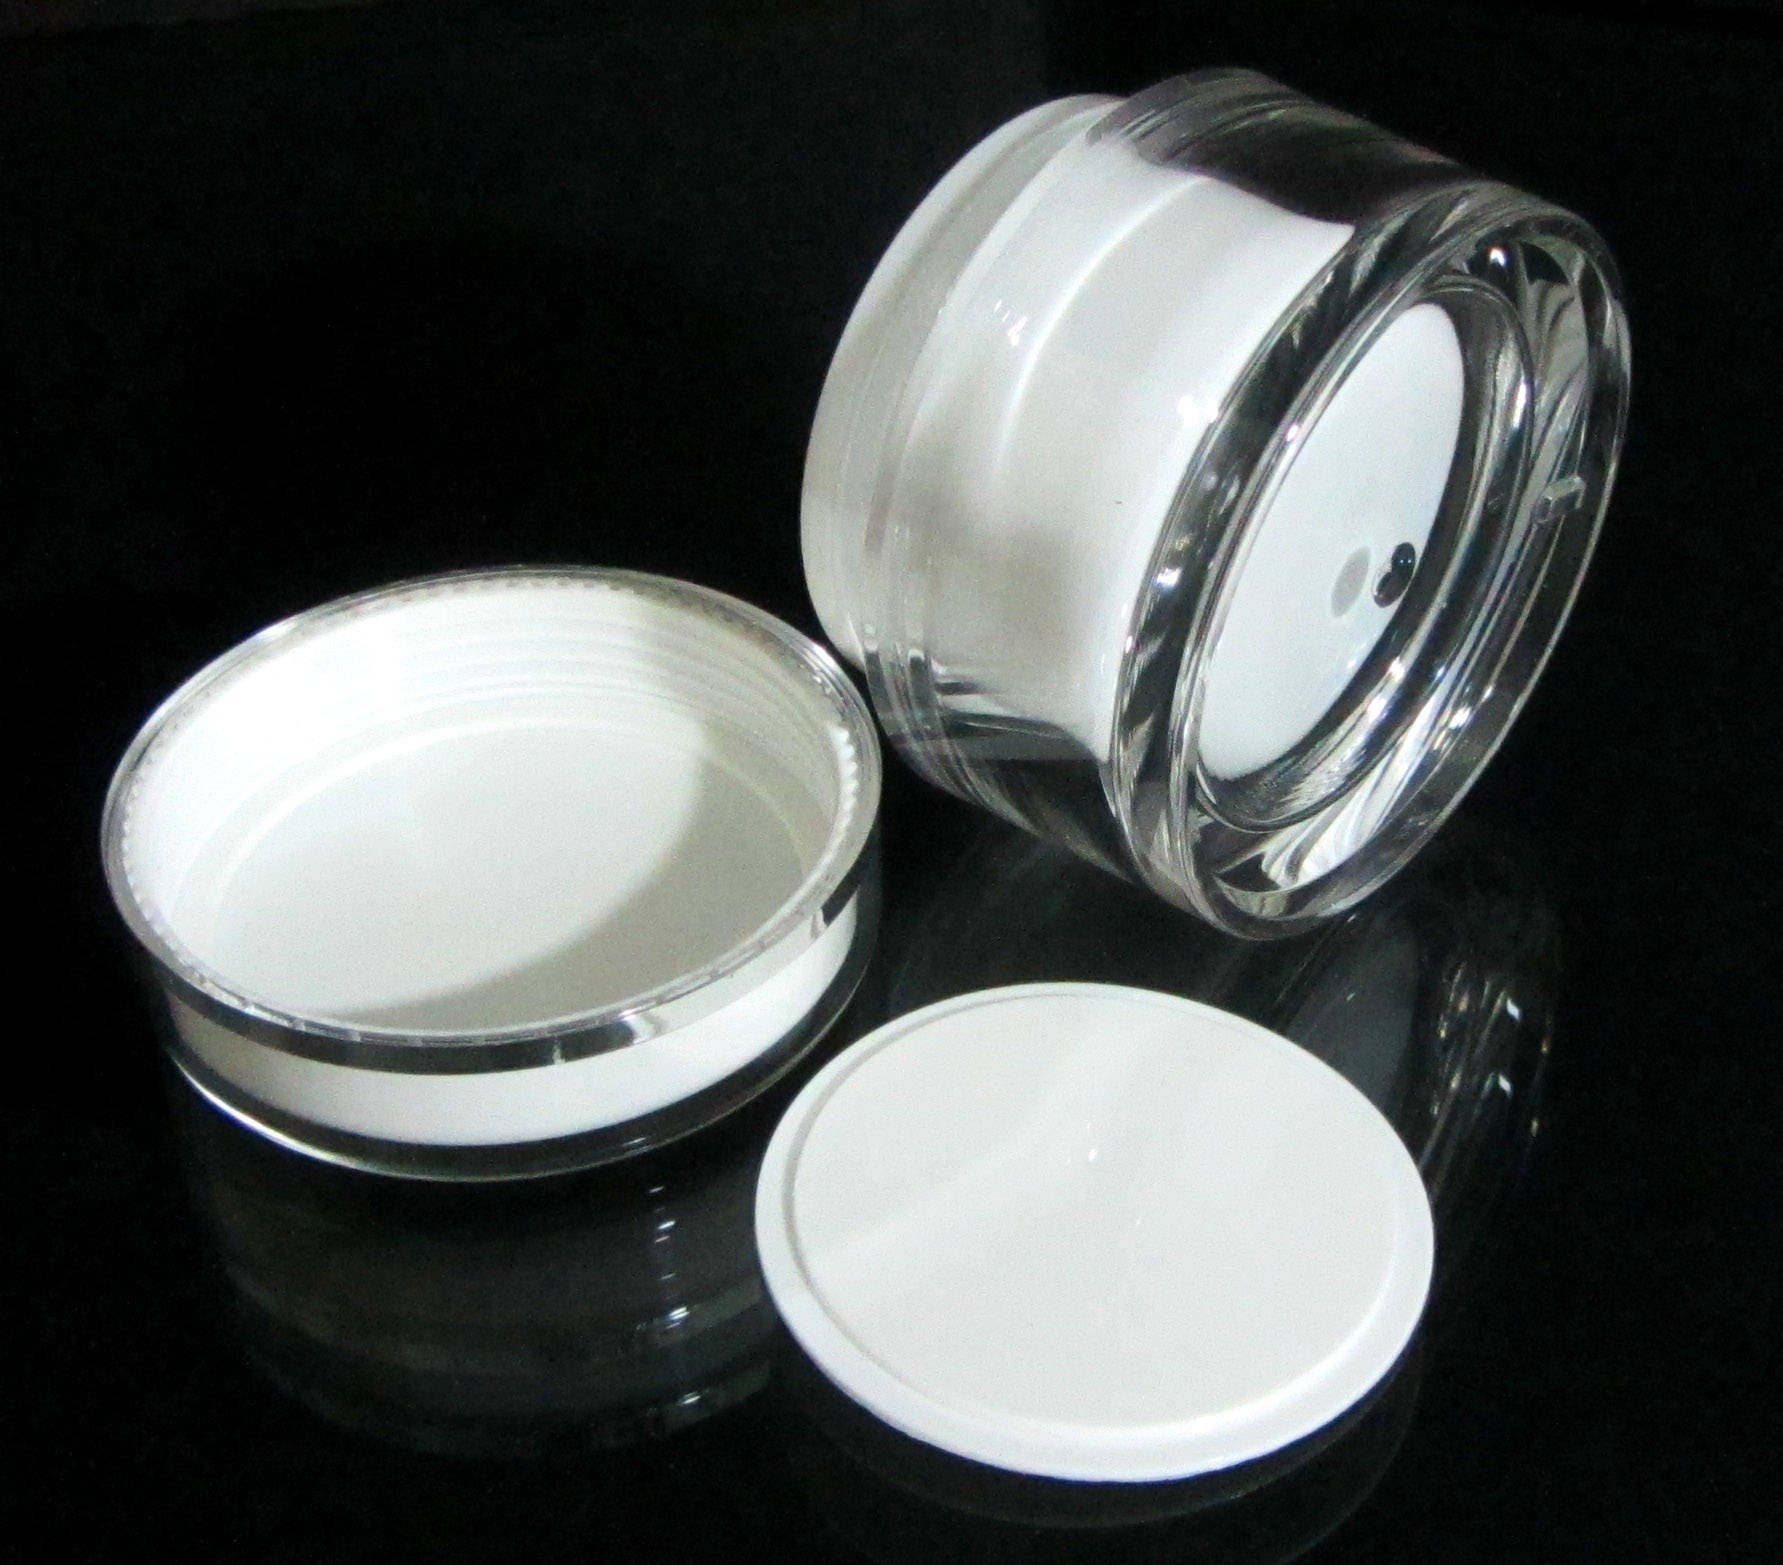 25 Acrylic Cosmetic Cream Jar Elegant Beauty Empty Containers w/ Sealing Disc 50 ML (3150-25) Discount Cosmetic Jars